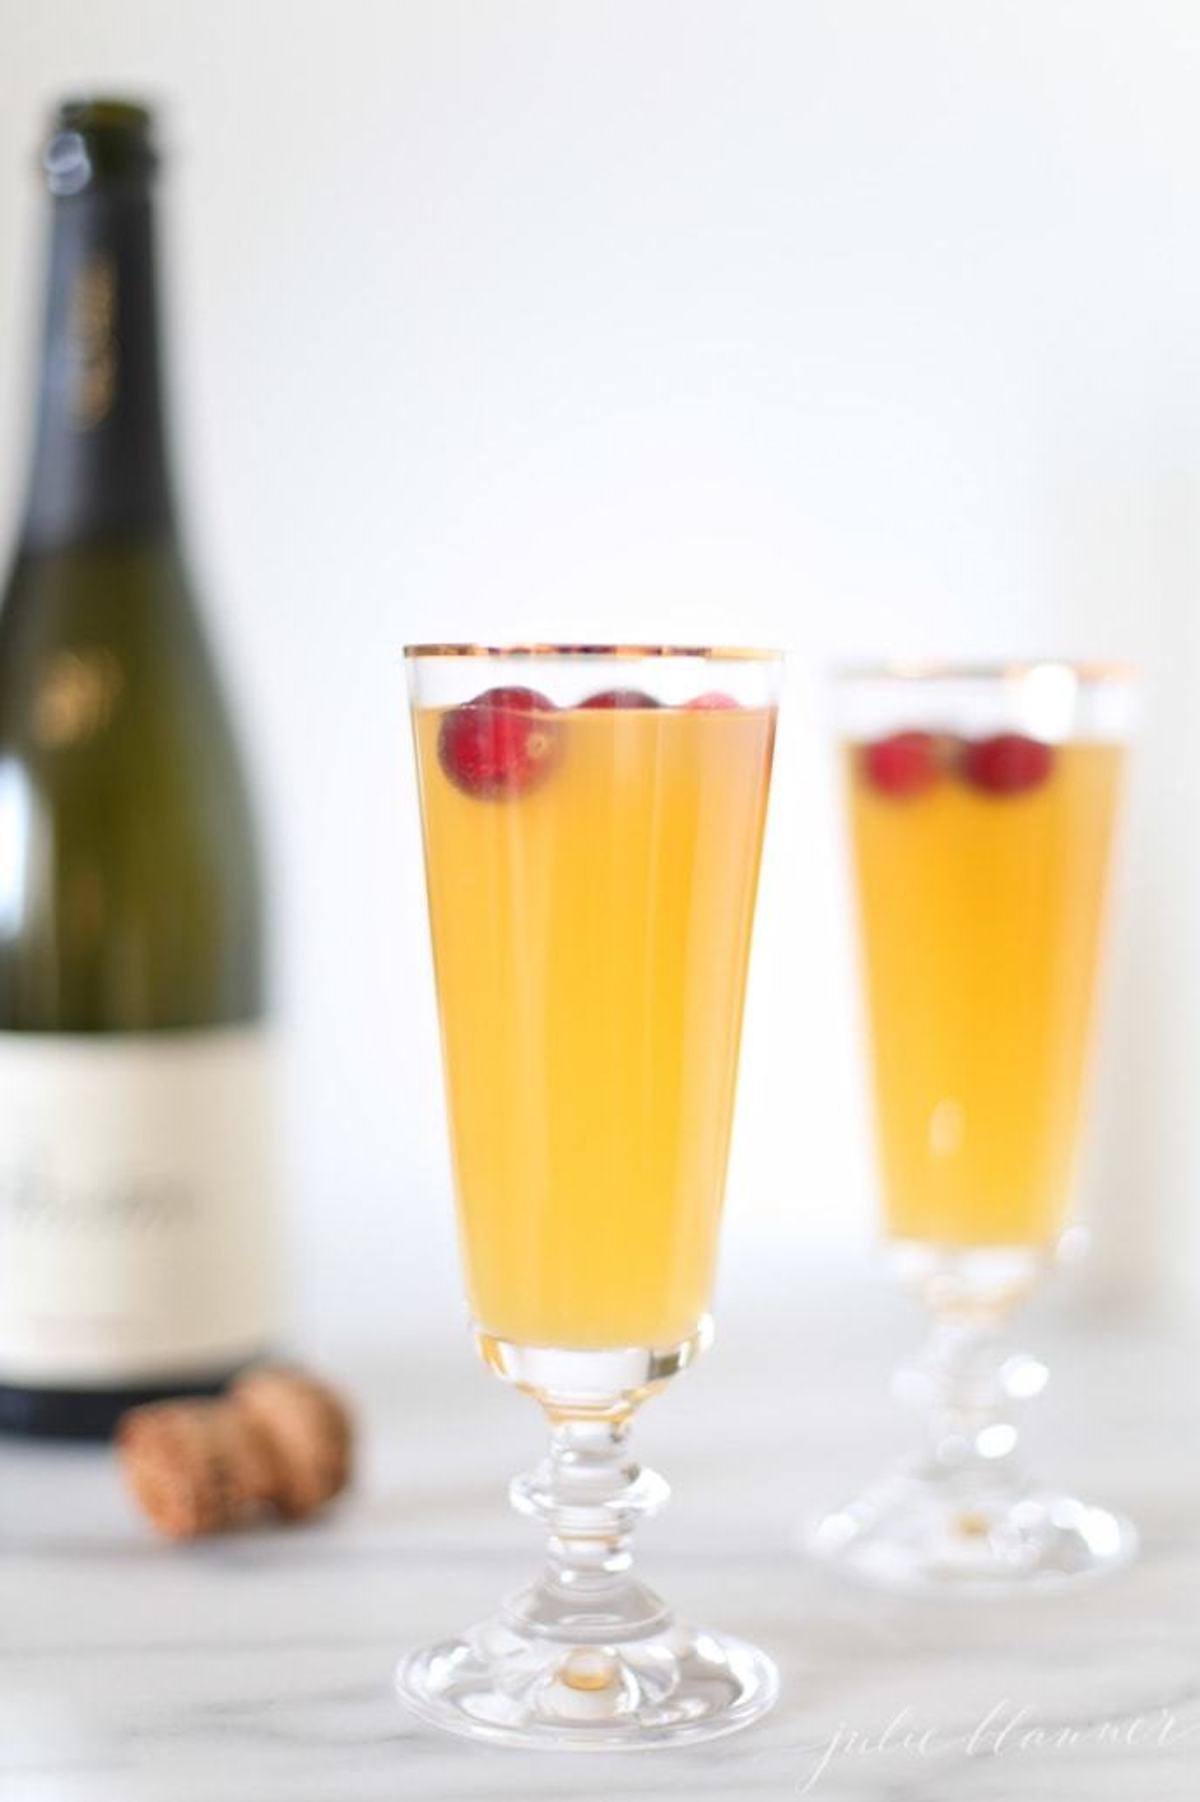 Two champagne flutes filled with a yellow-orange pear prosecco cocktail garnished with cranberries, with a bottle of champagne and cork in the background.